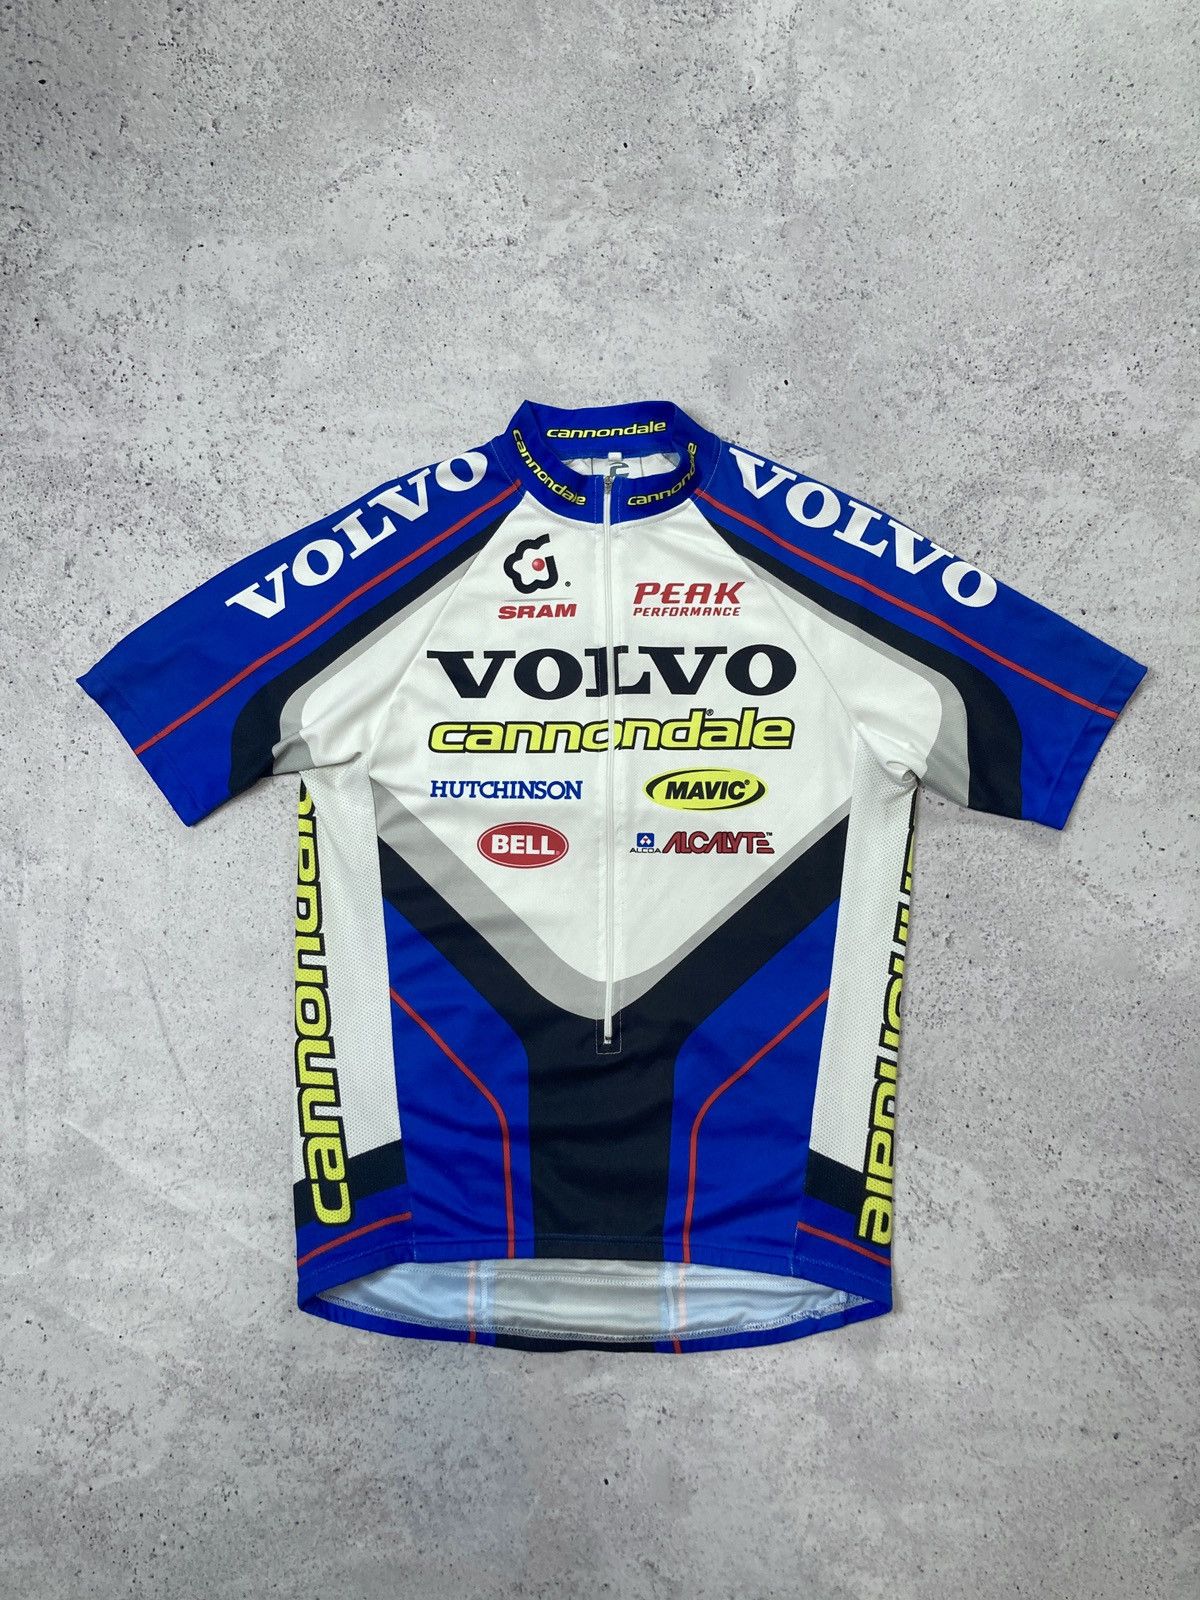 Pre-owned Bicycle X Racing Vintage Cannondale Volvo 3/4 Zip Road Cycling Jersey Shirt In Multicolor